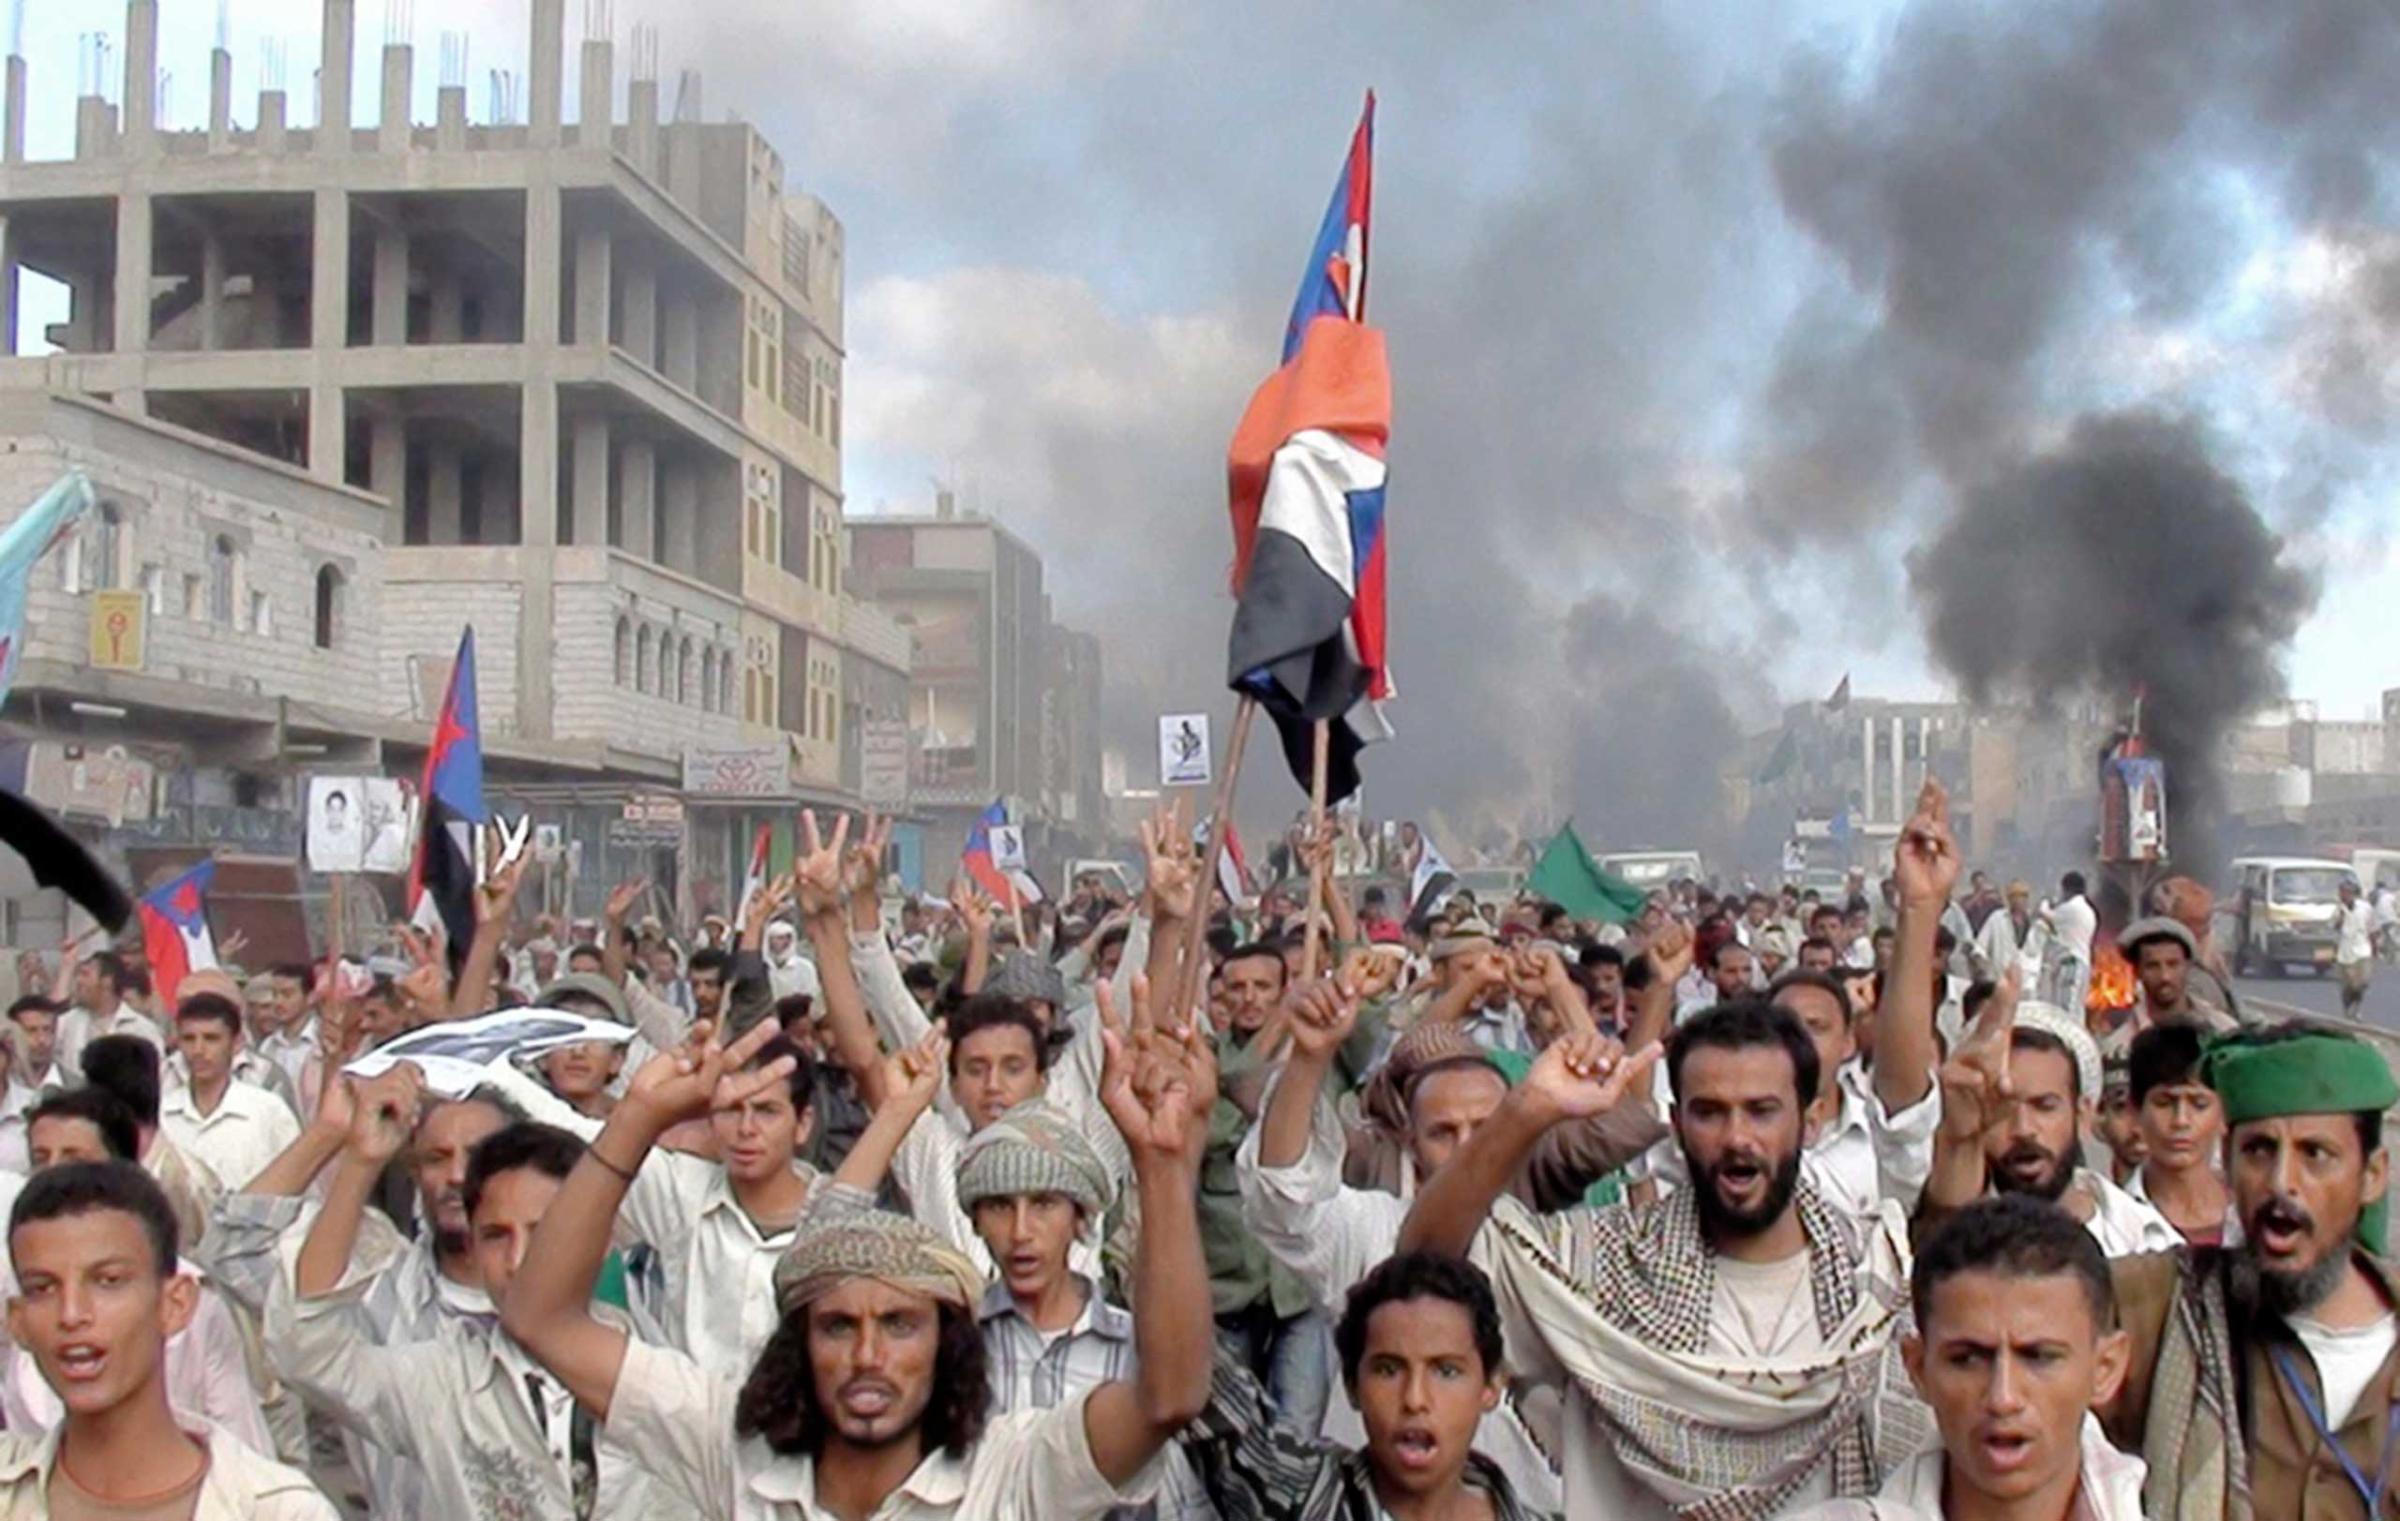 Protesters march during an anti-government demonstration in Radfan, a district in the southern Yemeni province of Lahej